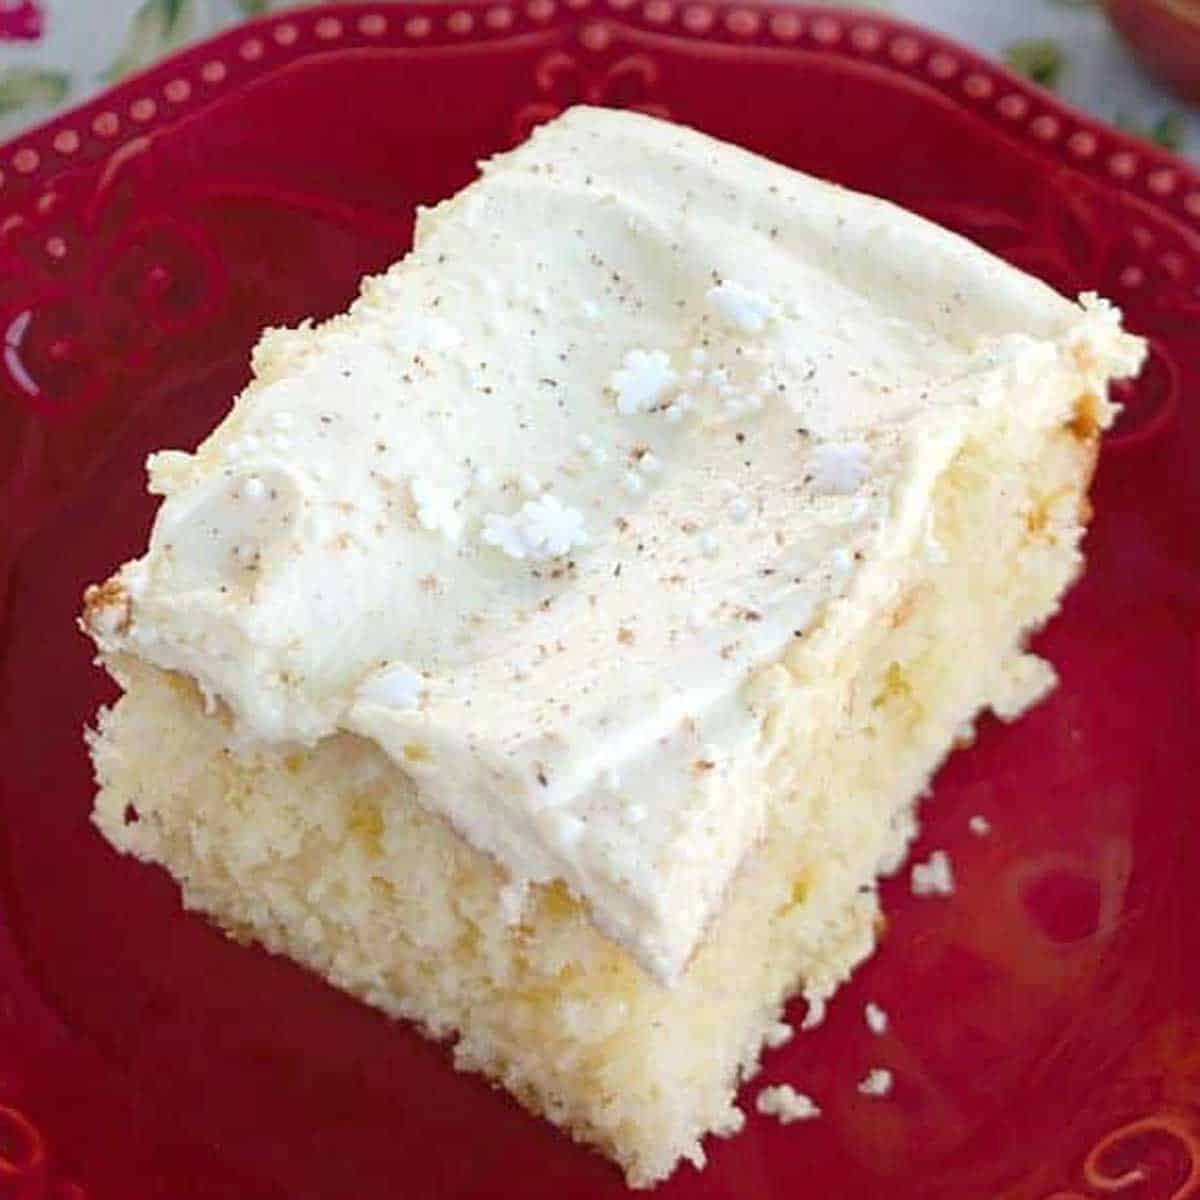 piece of eggnog cake on red plate